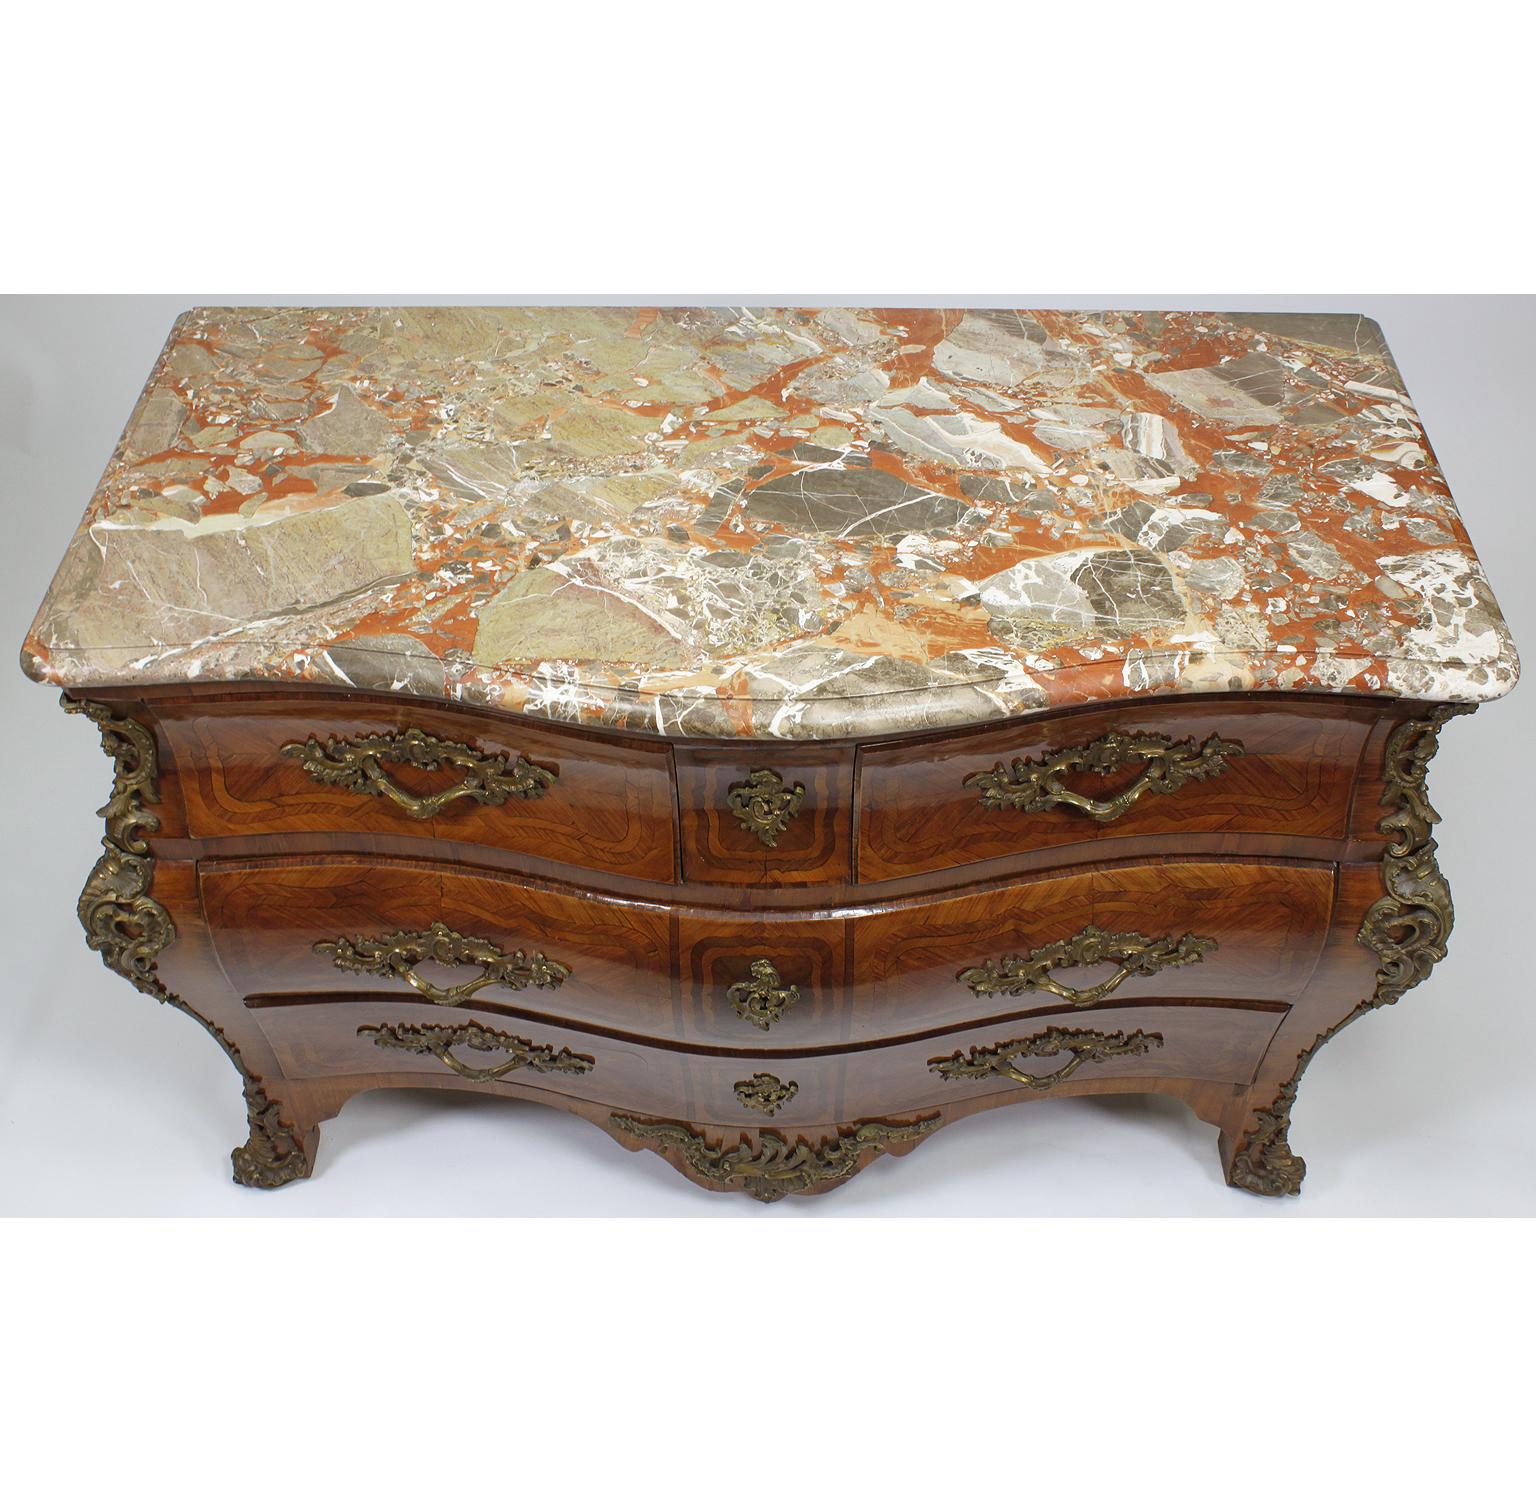 French Regency 19th/20th Century Louis XV/XVI Style Gilt-Bronze Mounted Commode For Sale 3